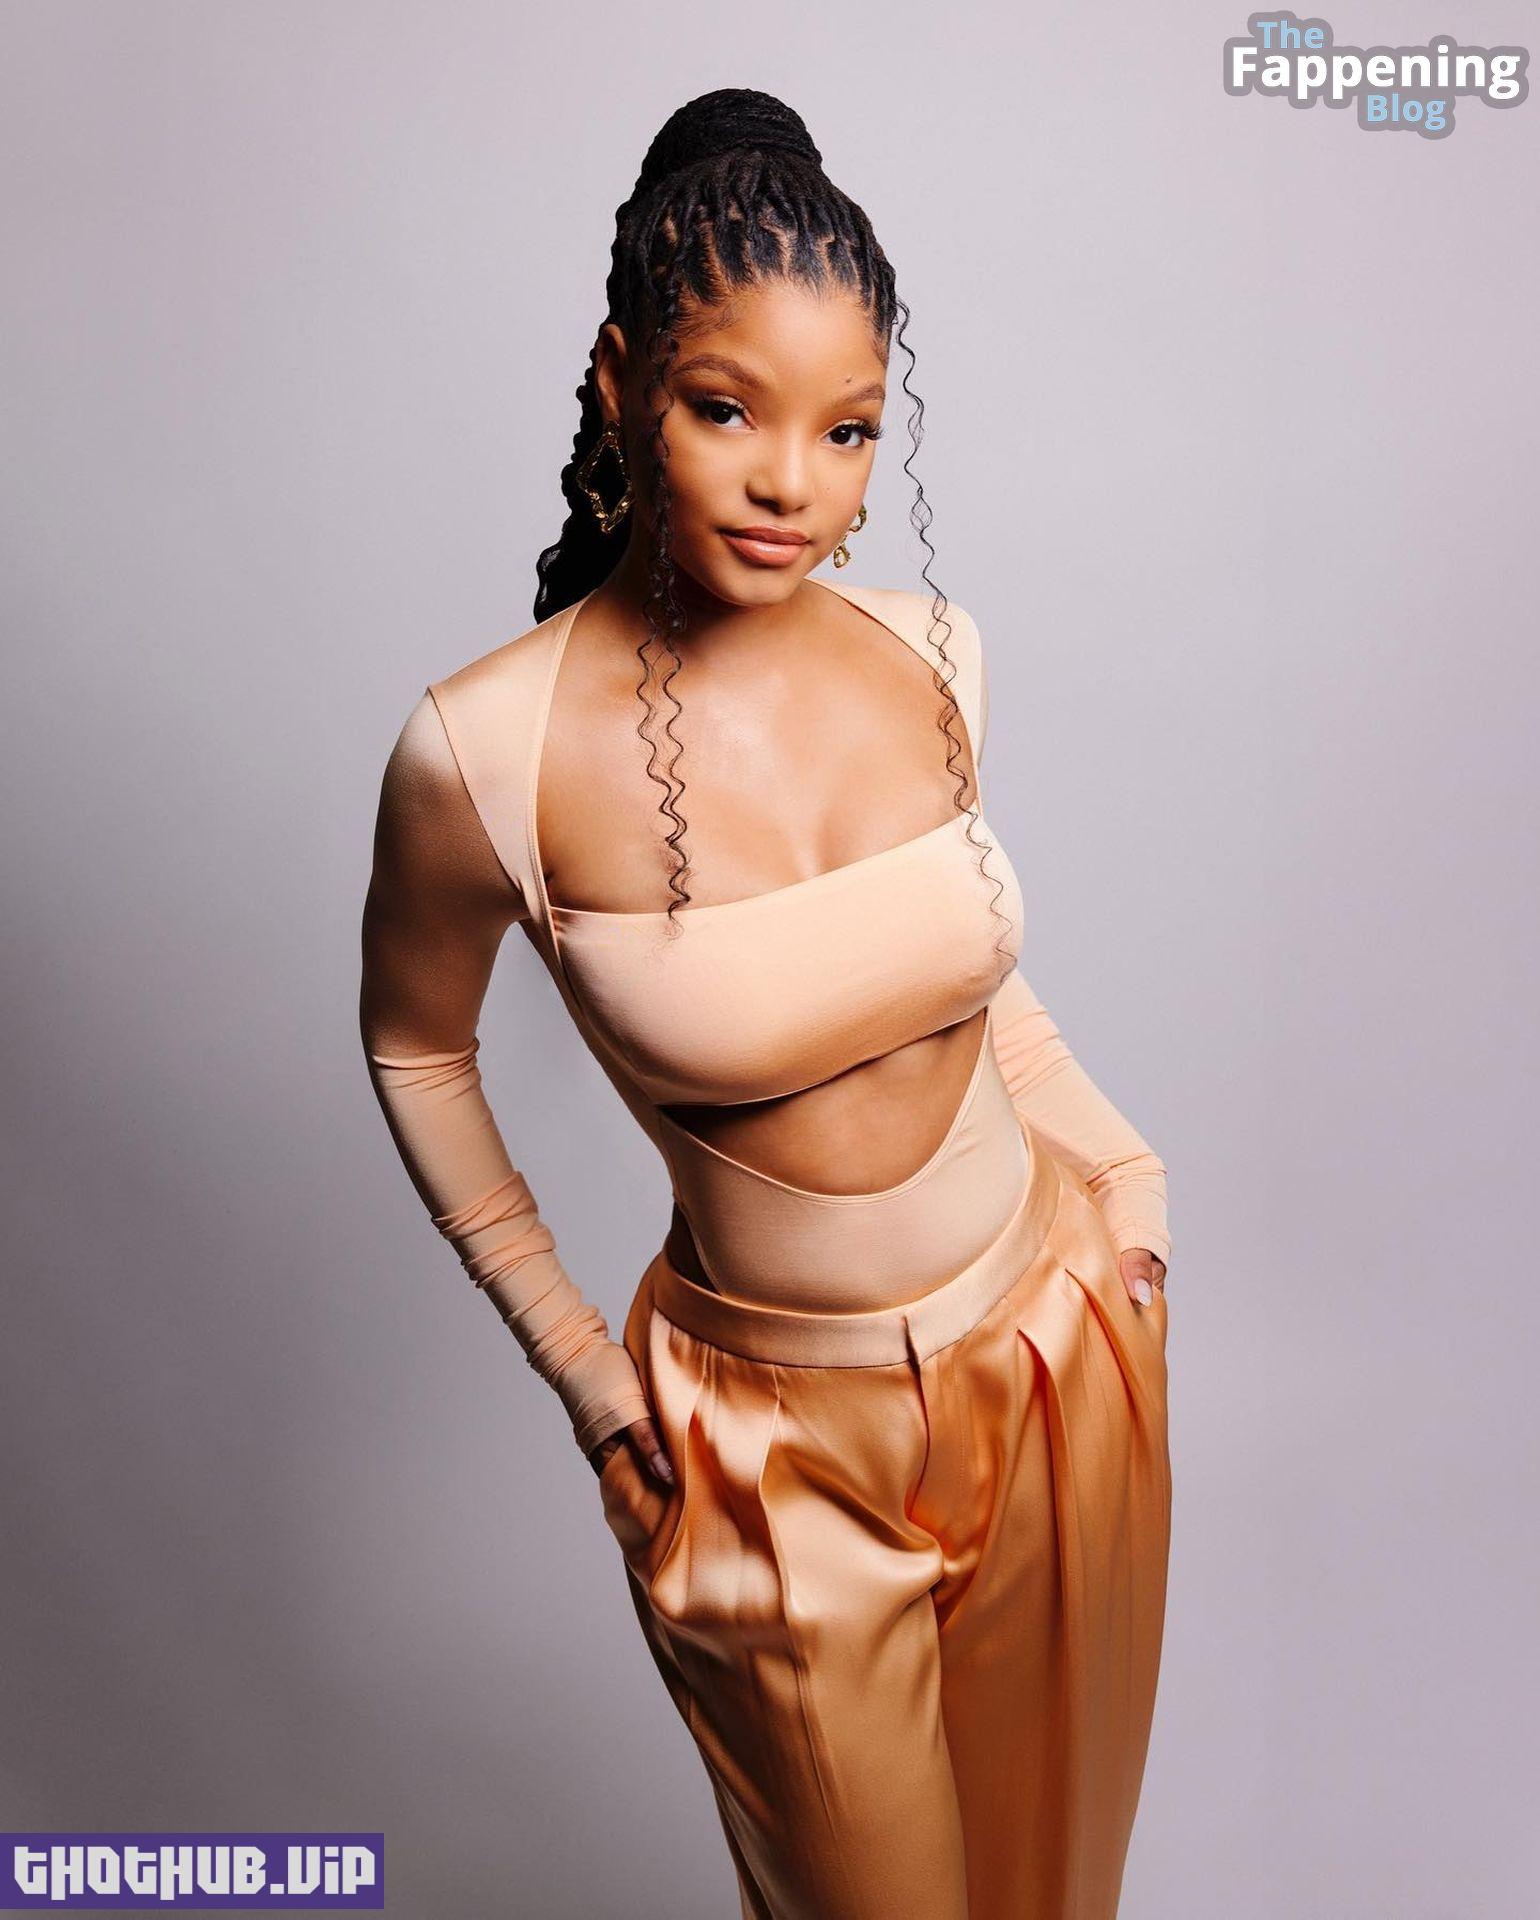 Halle Bailey Sexy The Fappening Blog 4 1